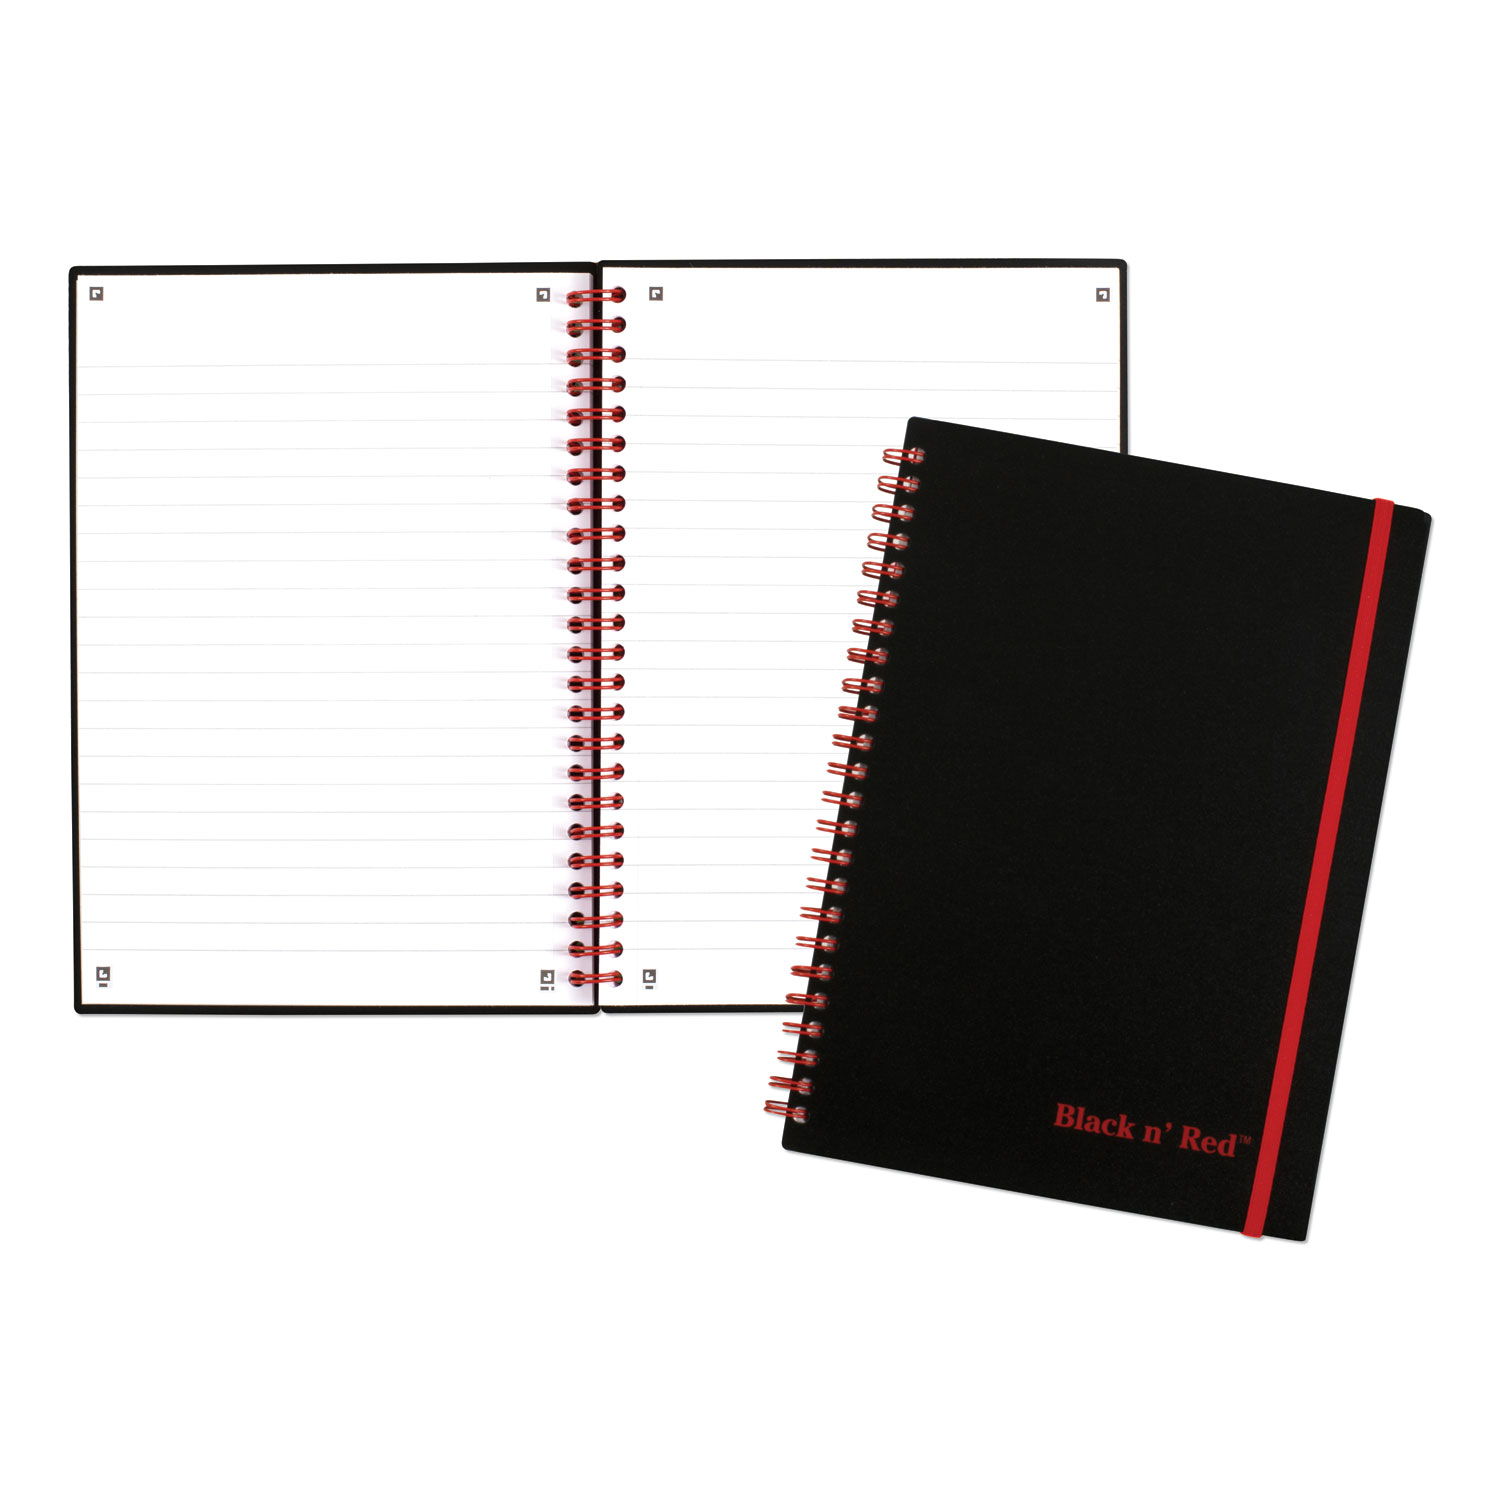 Tru Red Flexible-Cover Business Journal, Dotted Rule, Black Cover, 8 x 10, 128 Sheets